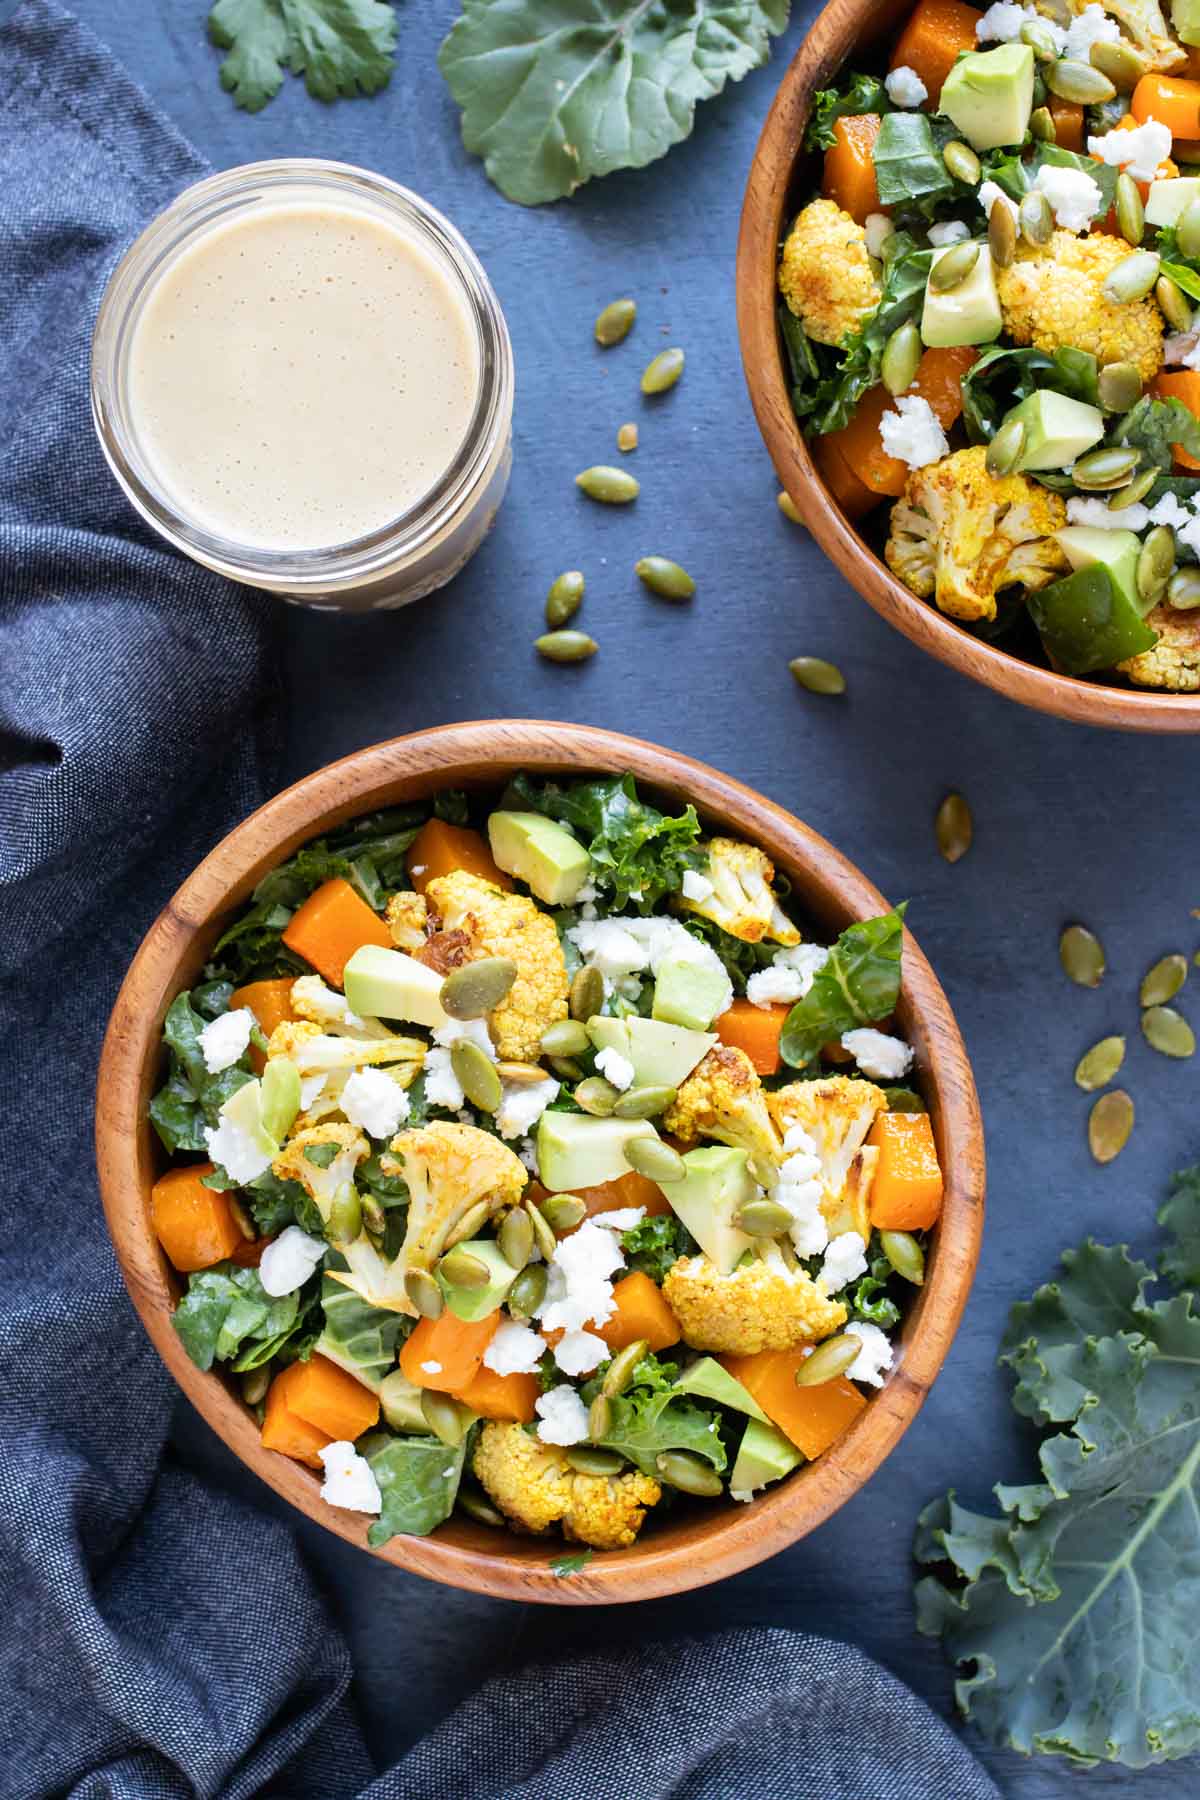 Two wooden bowls full of a healthy homemade roasted vegetable salad with cauliflower and butternut squash.